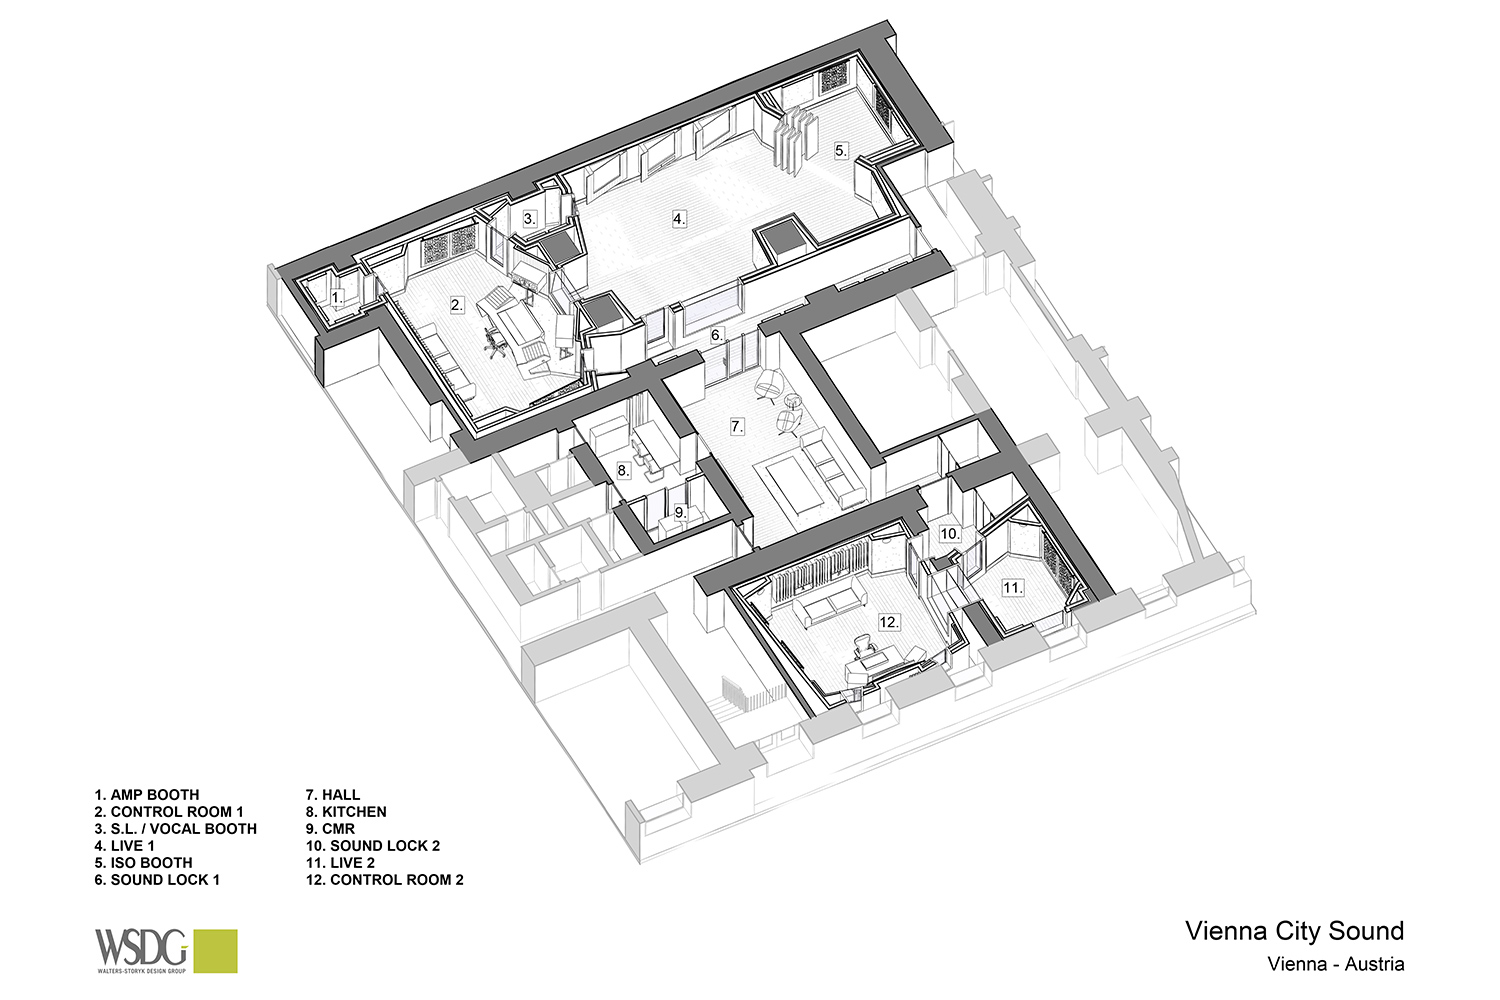 Vienna City Sound is a twelve-room recording studio built in the basement of a vintage commercial building in the heart of Vienna. Owner Peter Zimmerl’s retained the services of WSDG to design his dream studio. Presentation drawing 1.